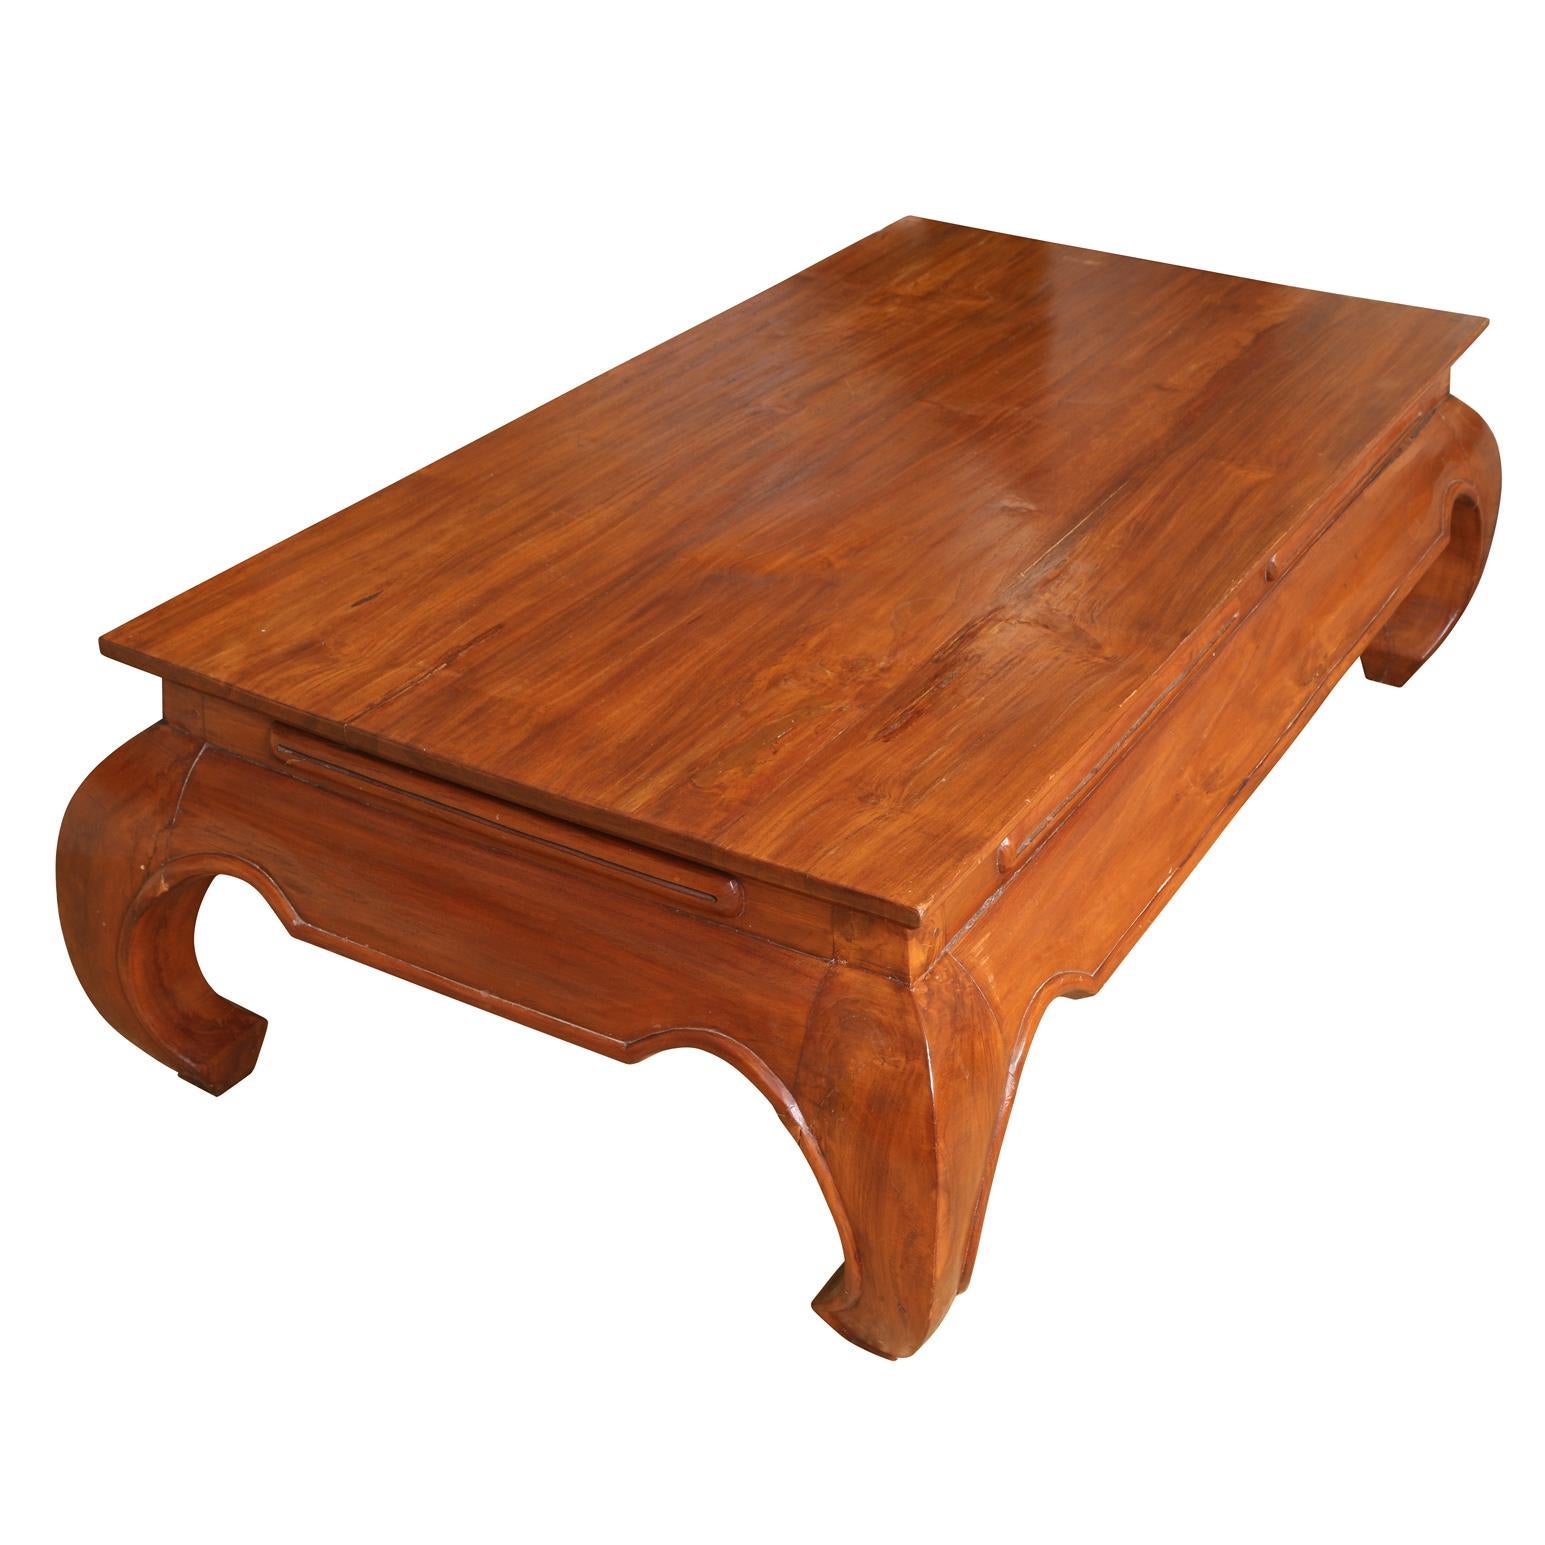 An Indonesian teak coffee table in Asian Ming style with curved legs.